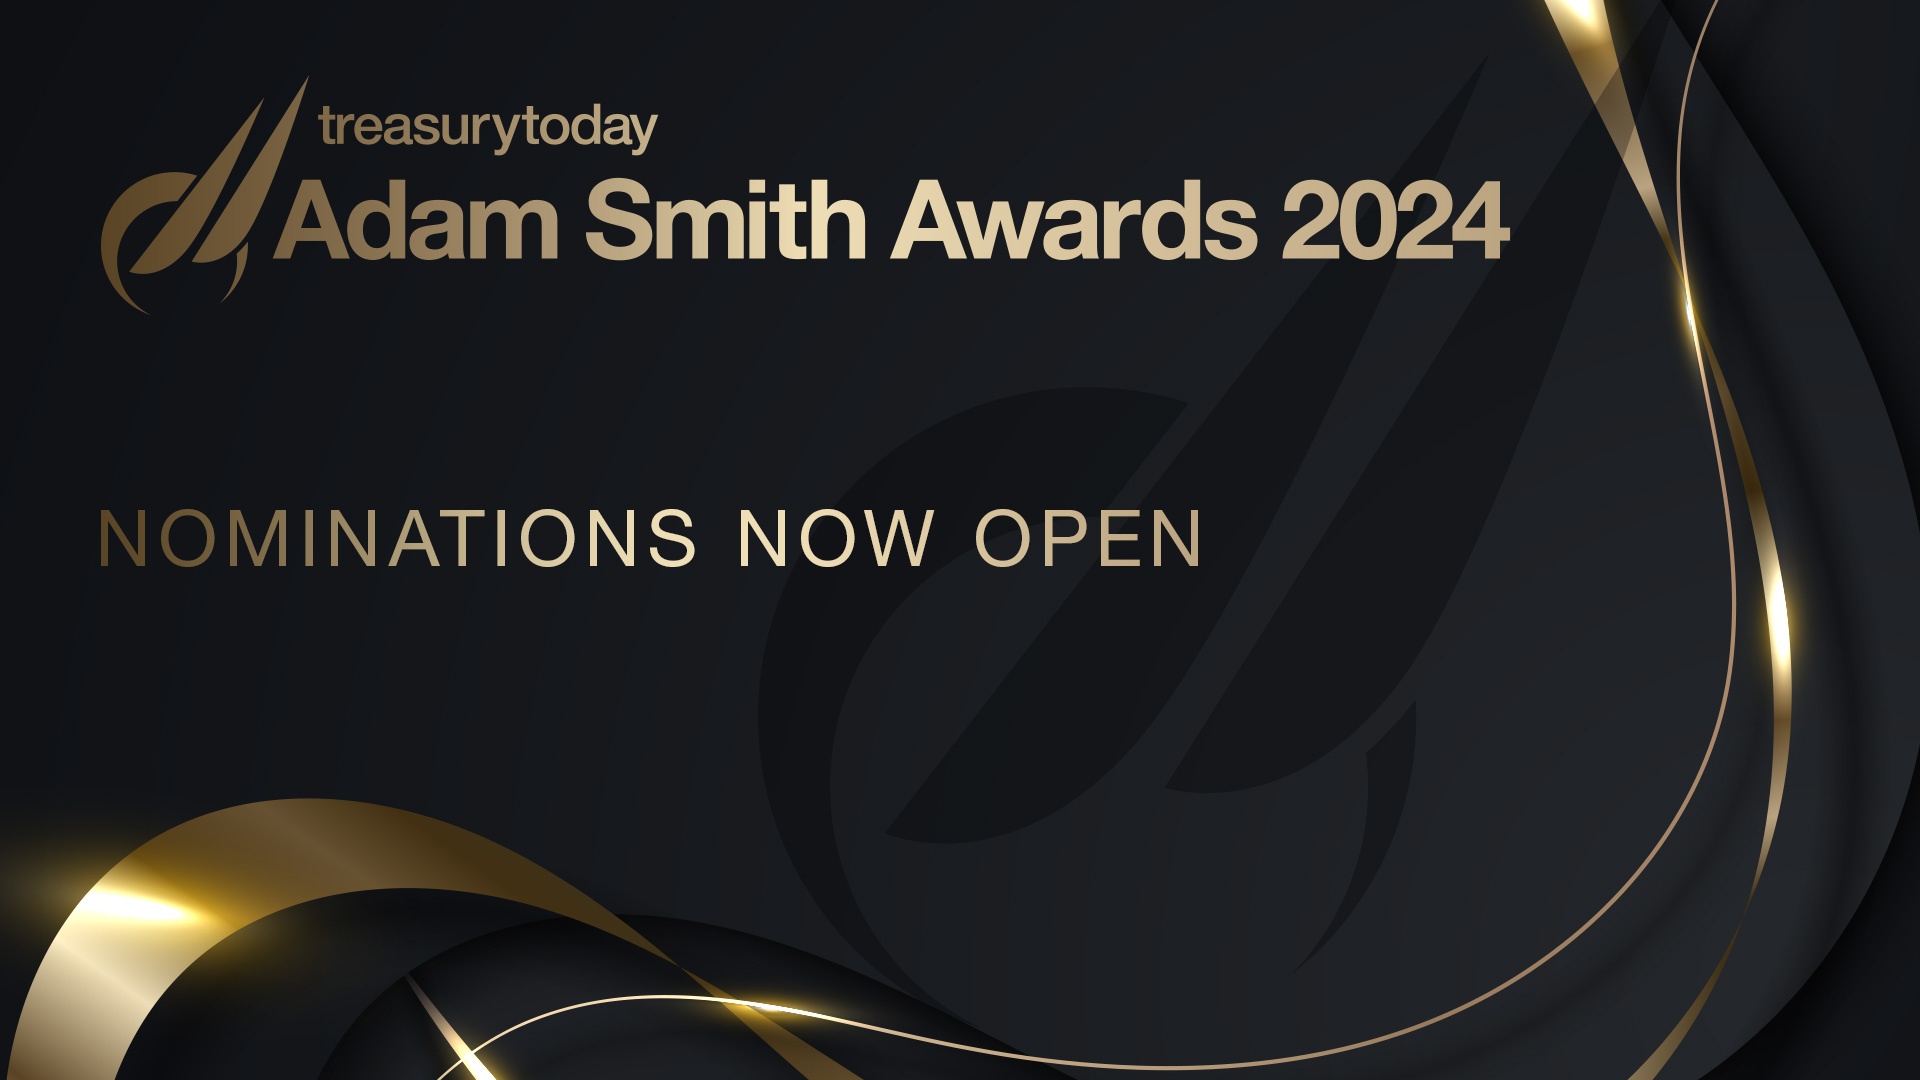 Adam Smith Awards 2024 nominations now open